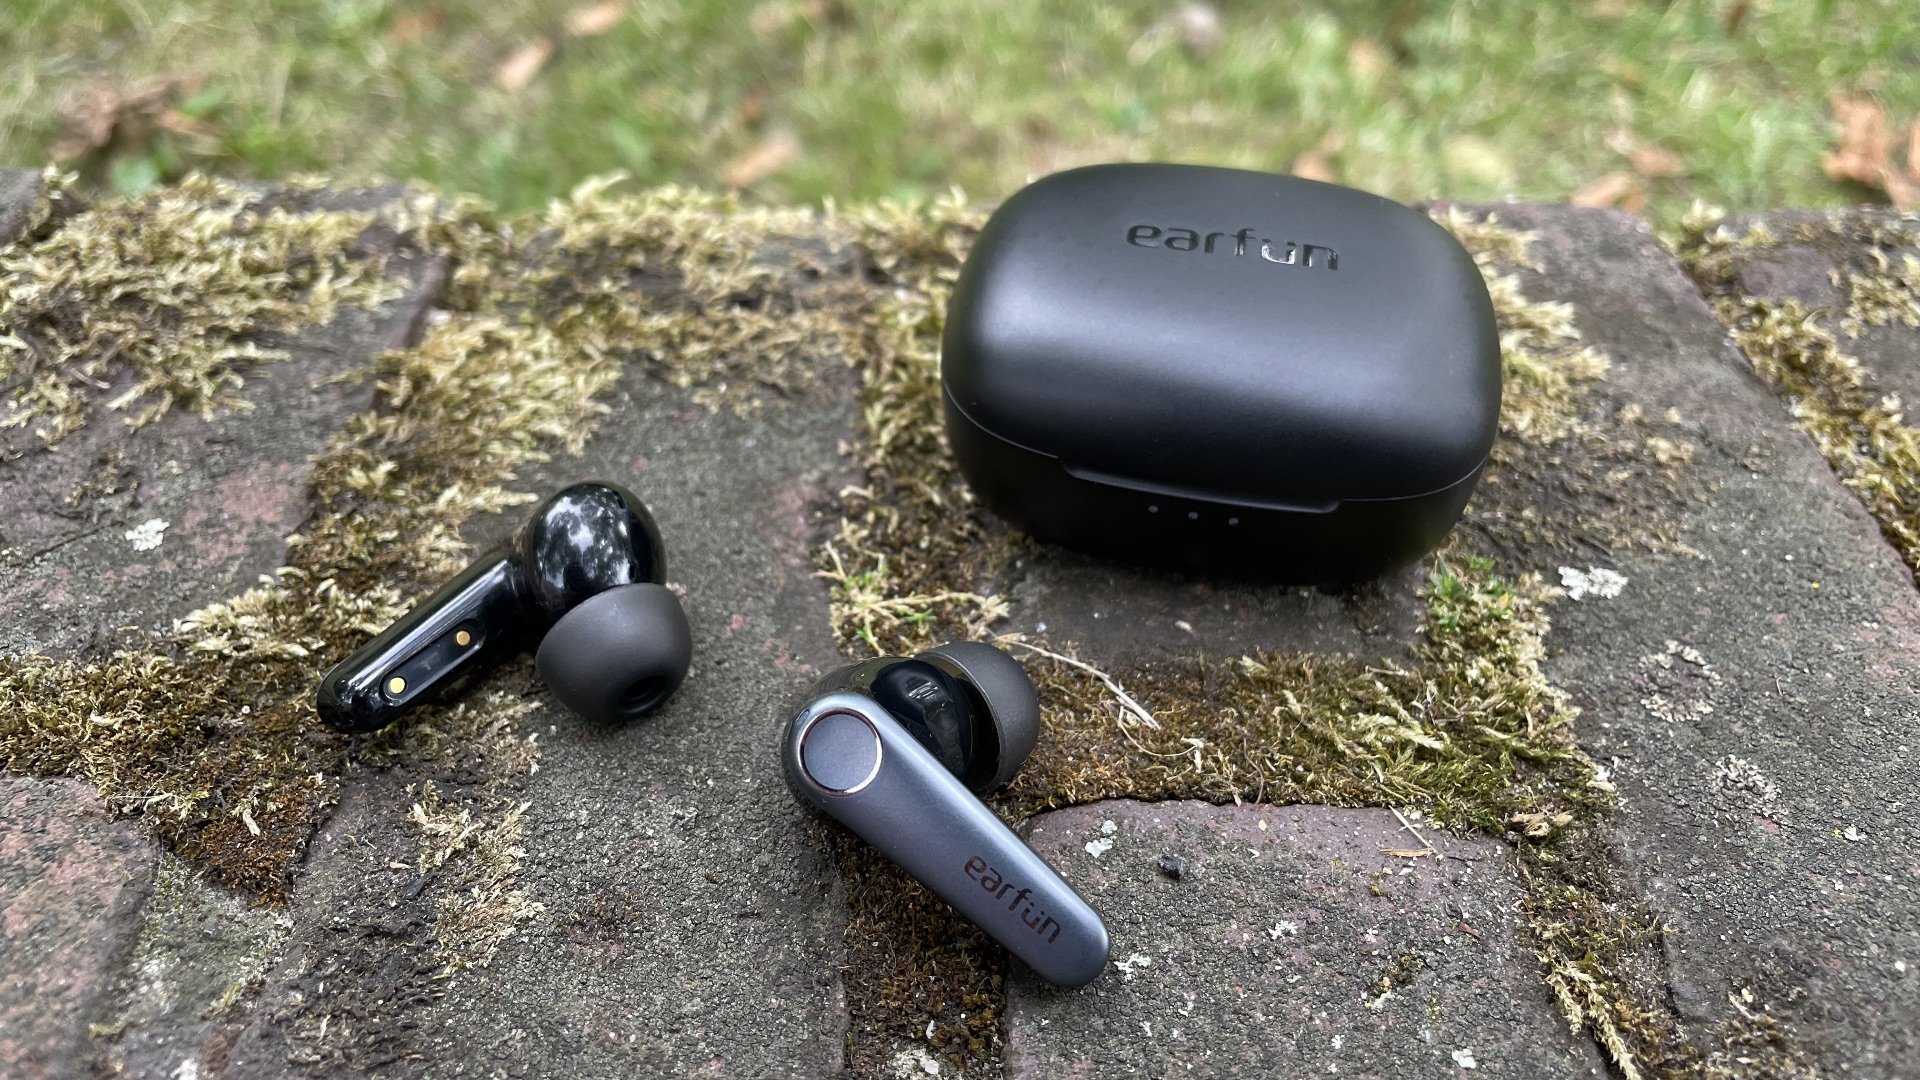 The best wireless earbuds for phone calls